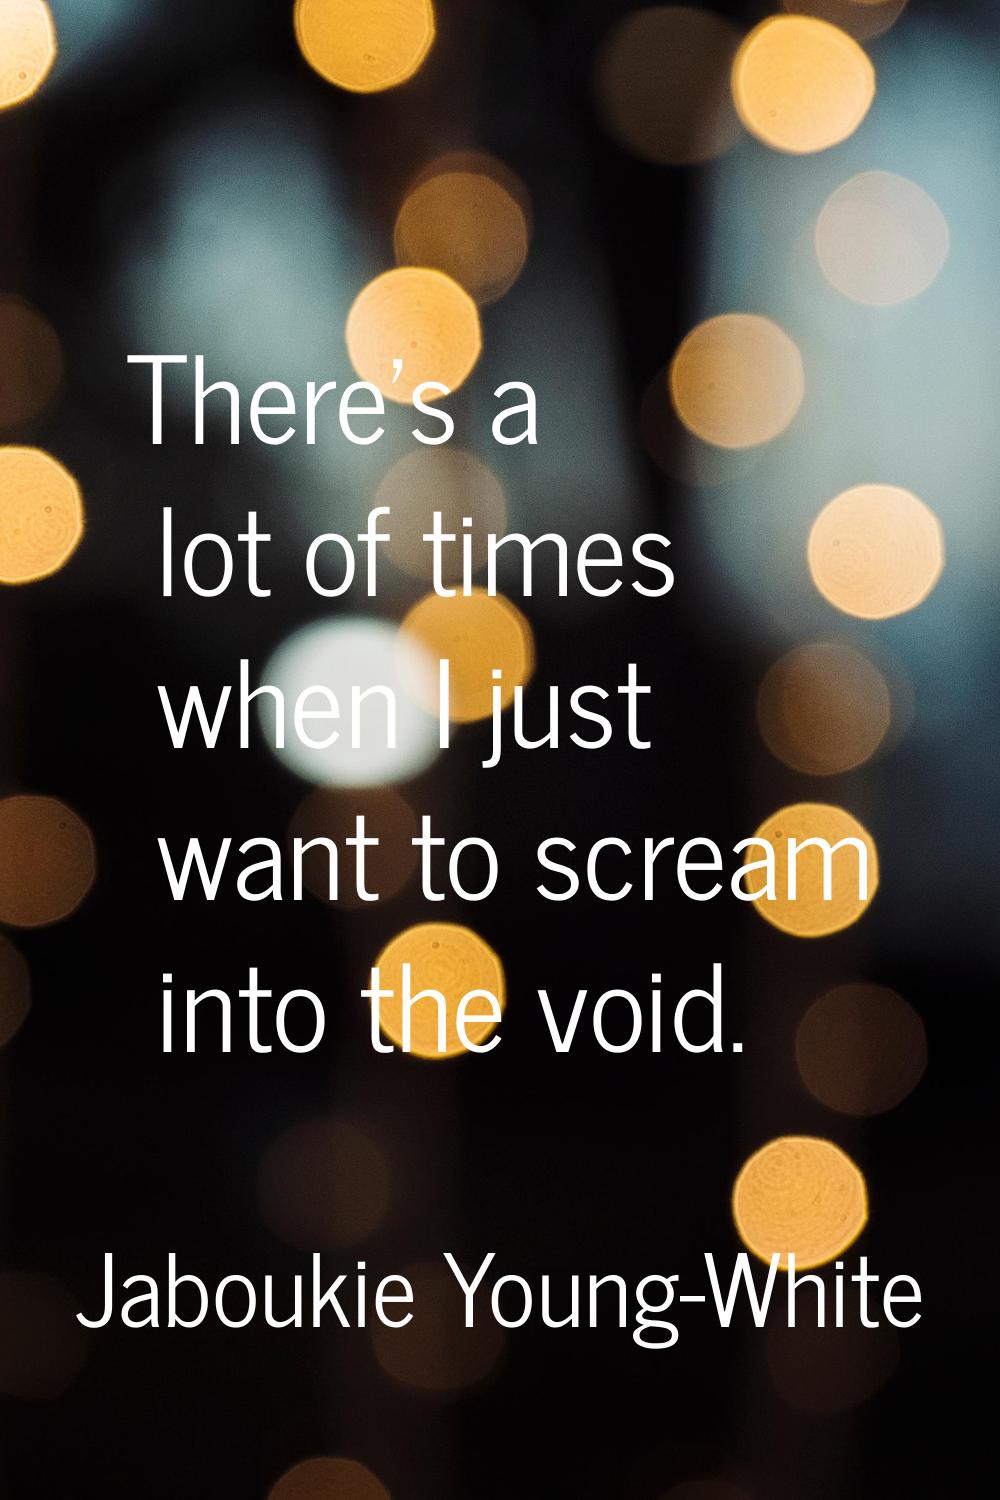 There's a lot of times when I just want to scream into the void.